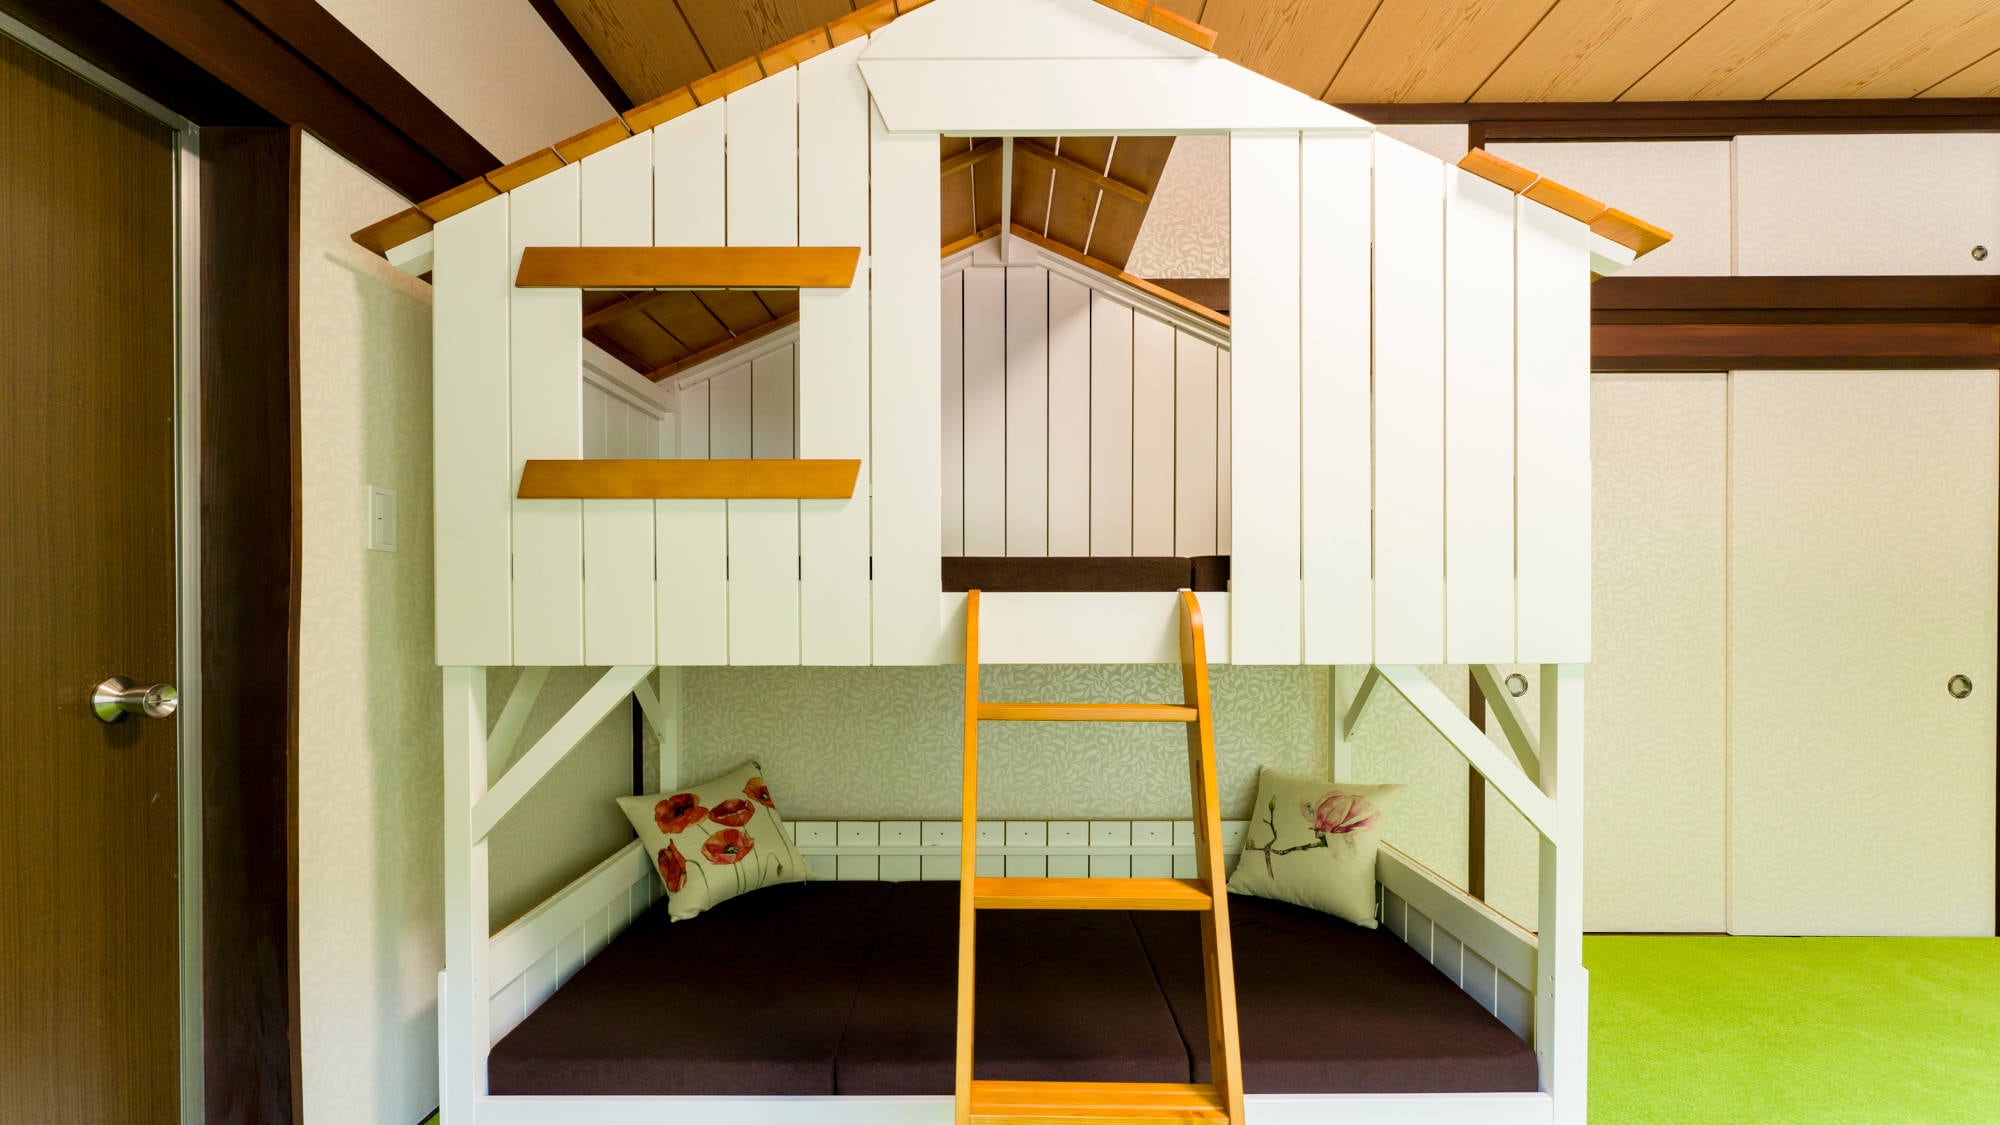 ・[Family Room A] A unique house-shaped bunk bed